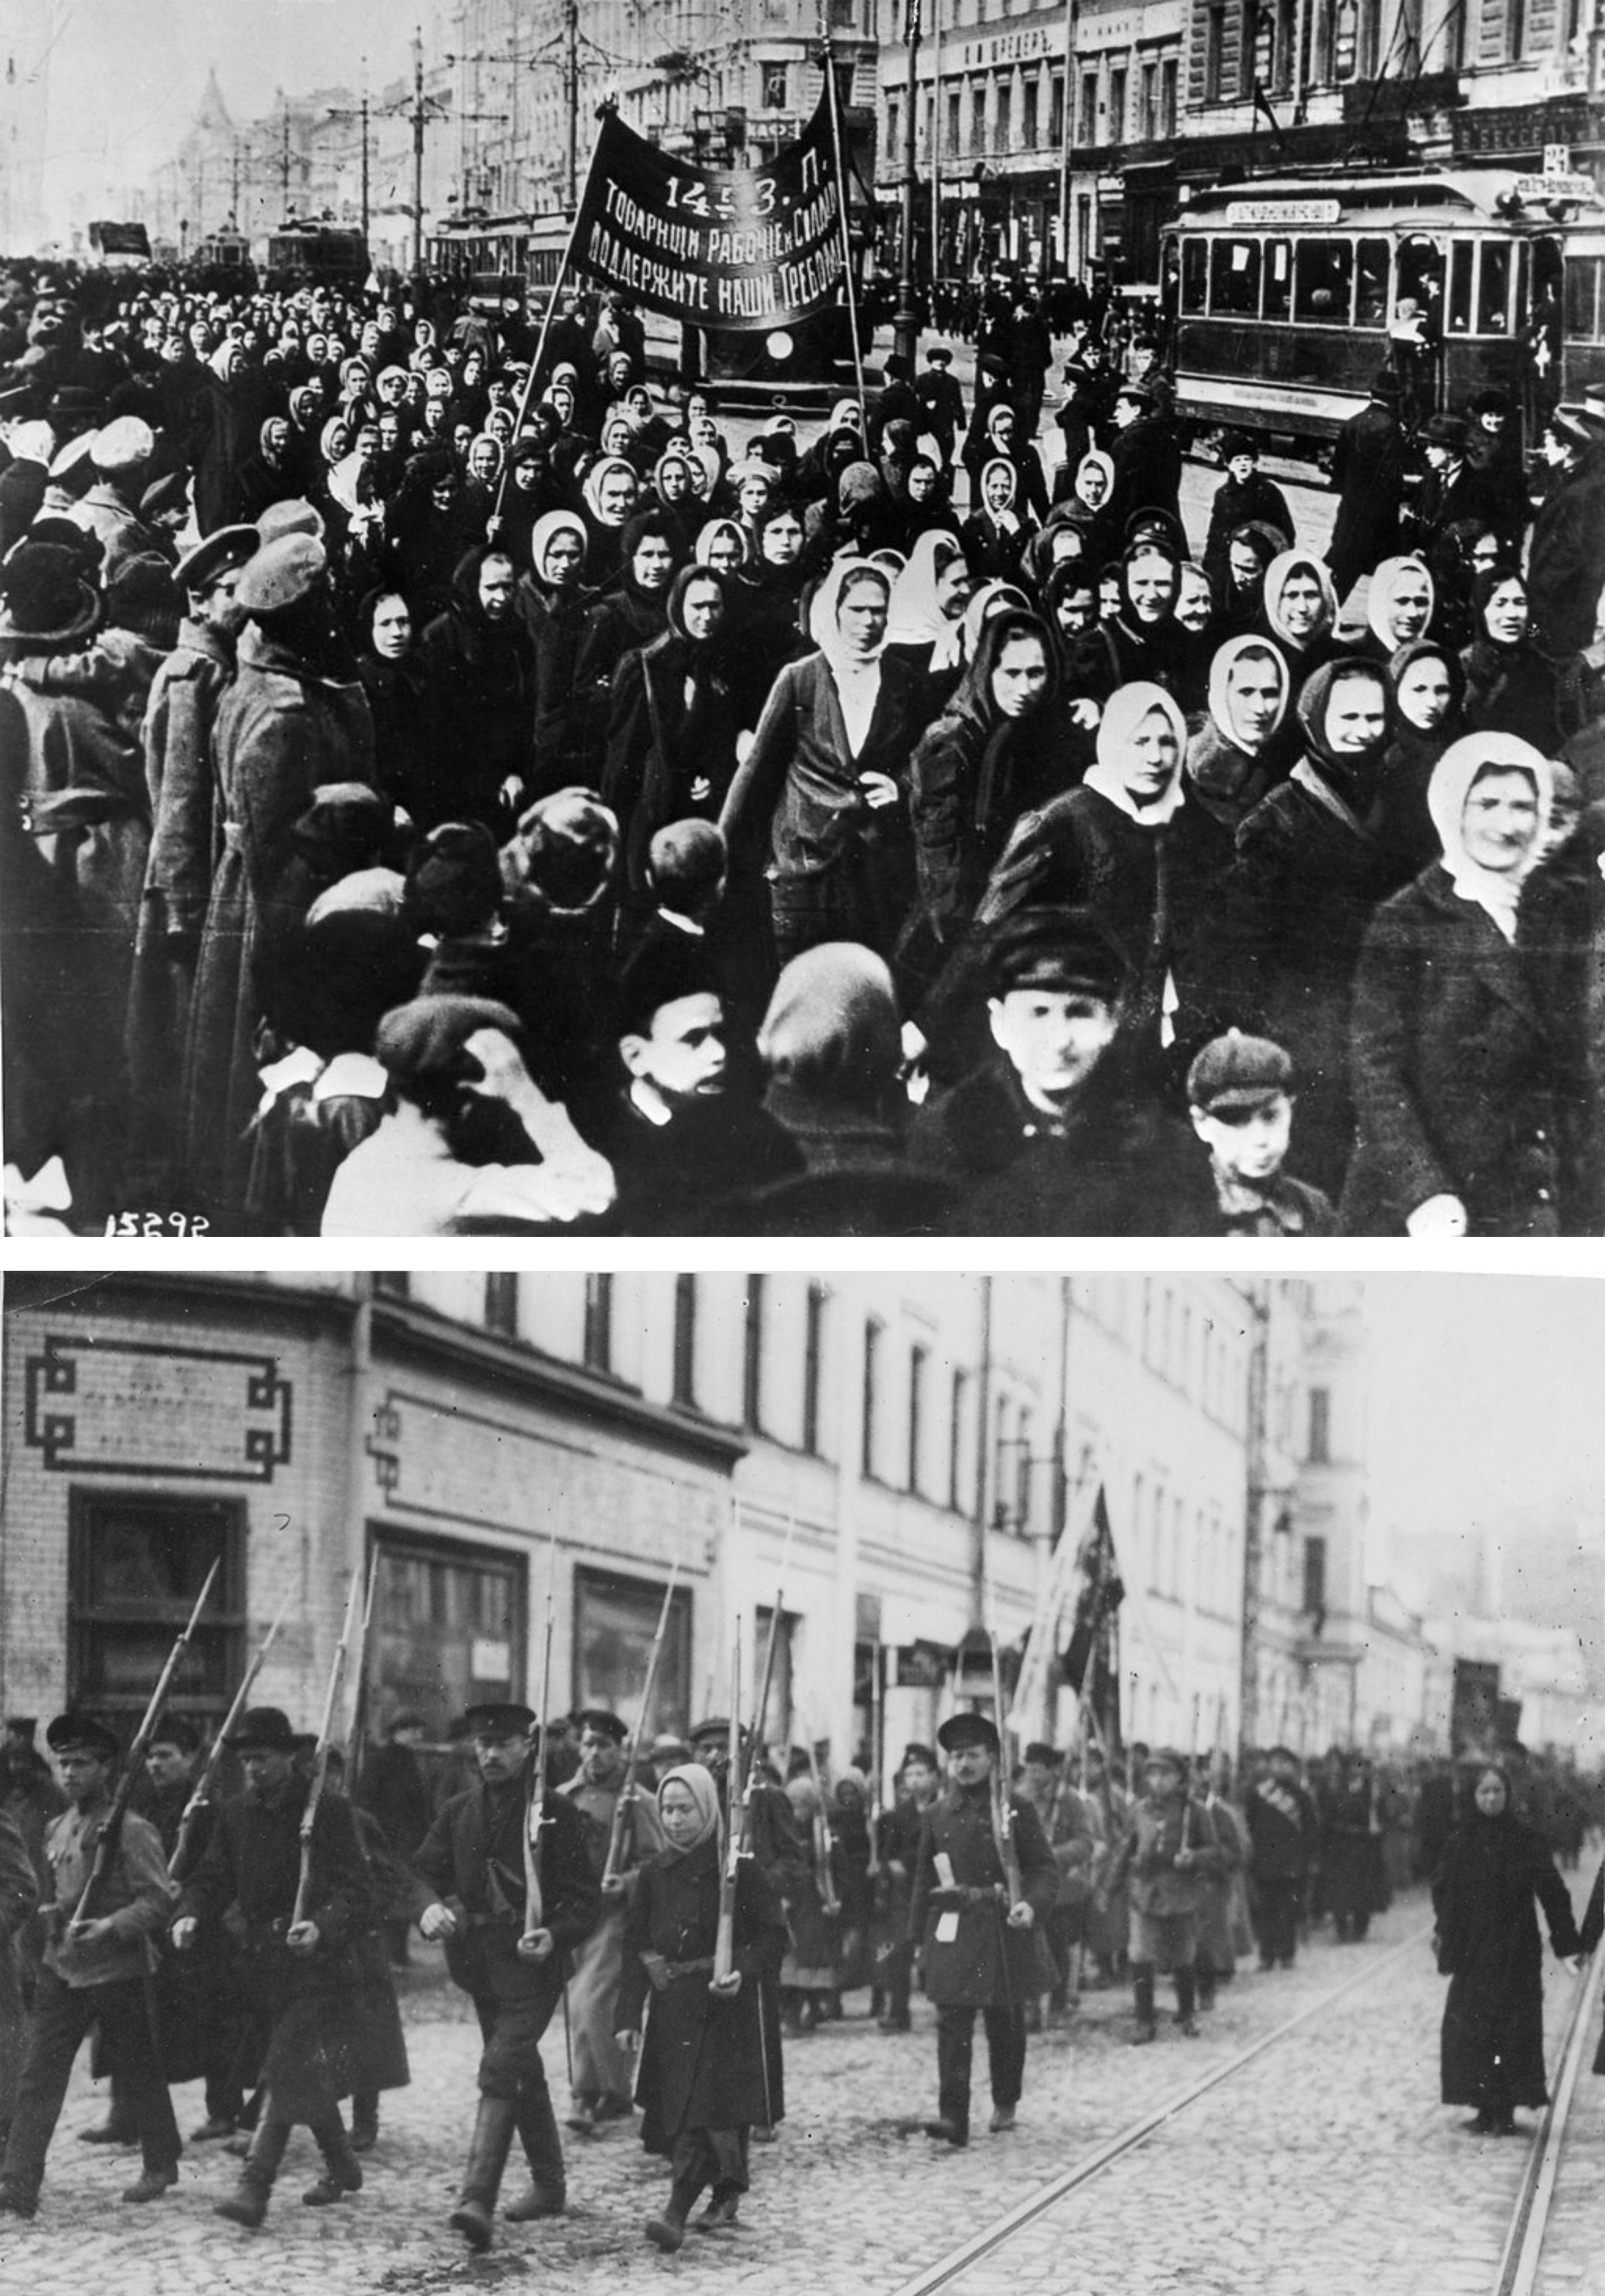 On the top, Russian women march in Petrograd, Russia in 1917. On the bottom, the Russian Revolution.